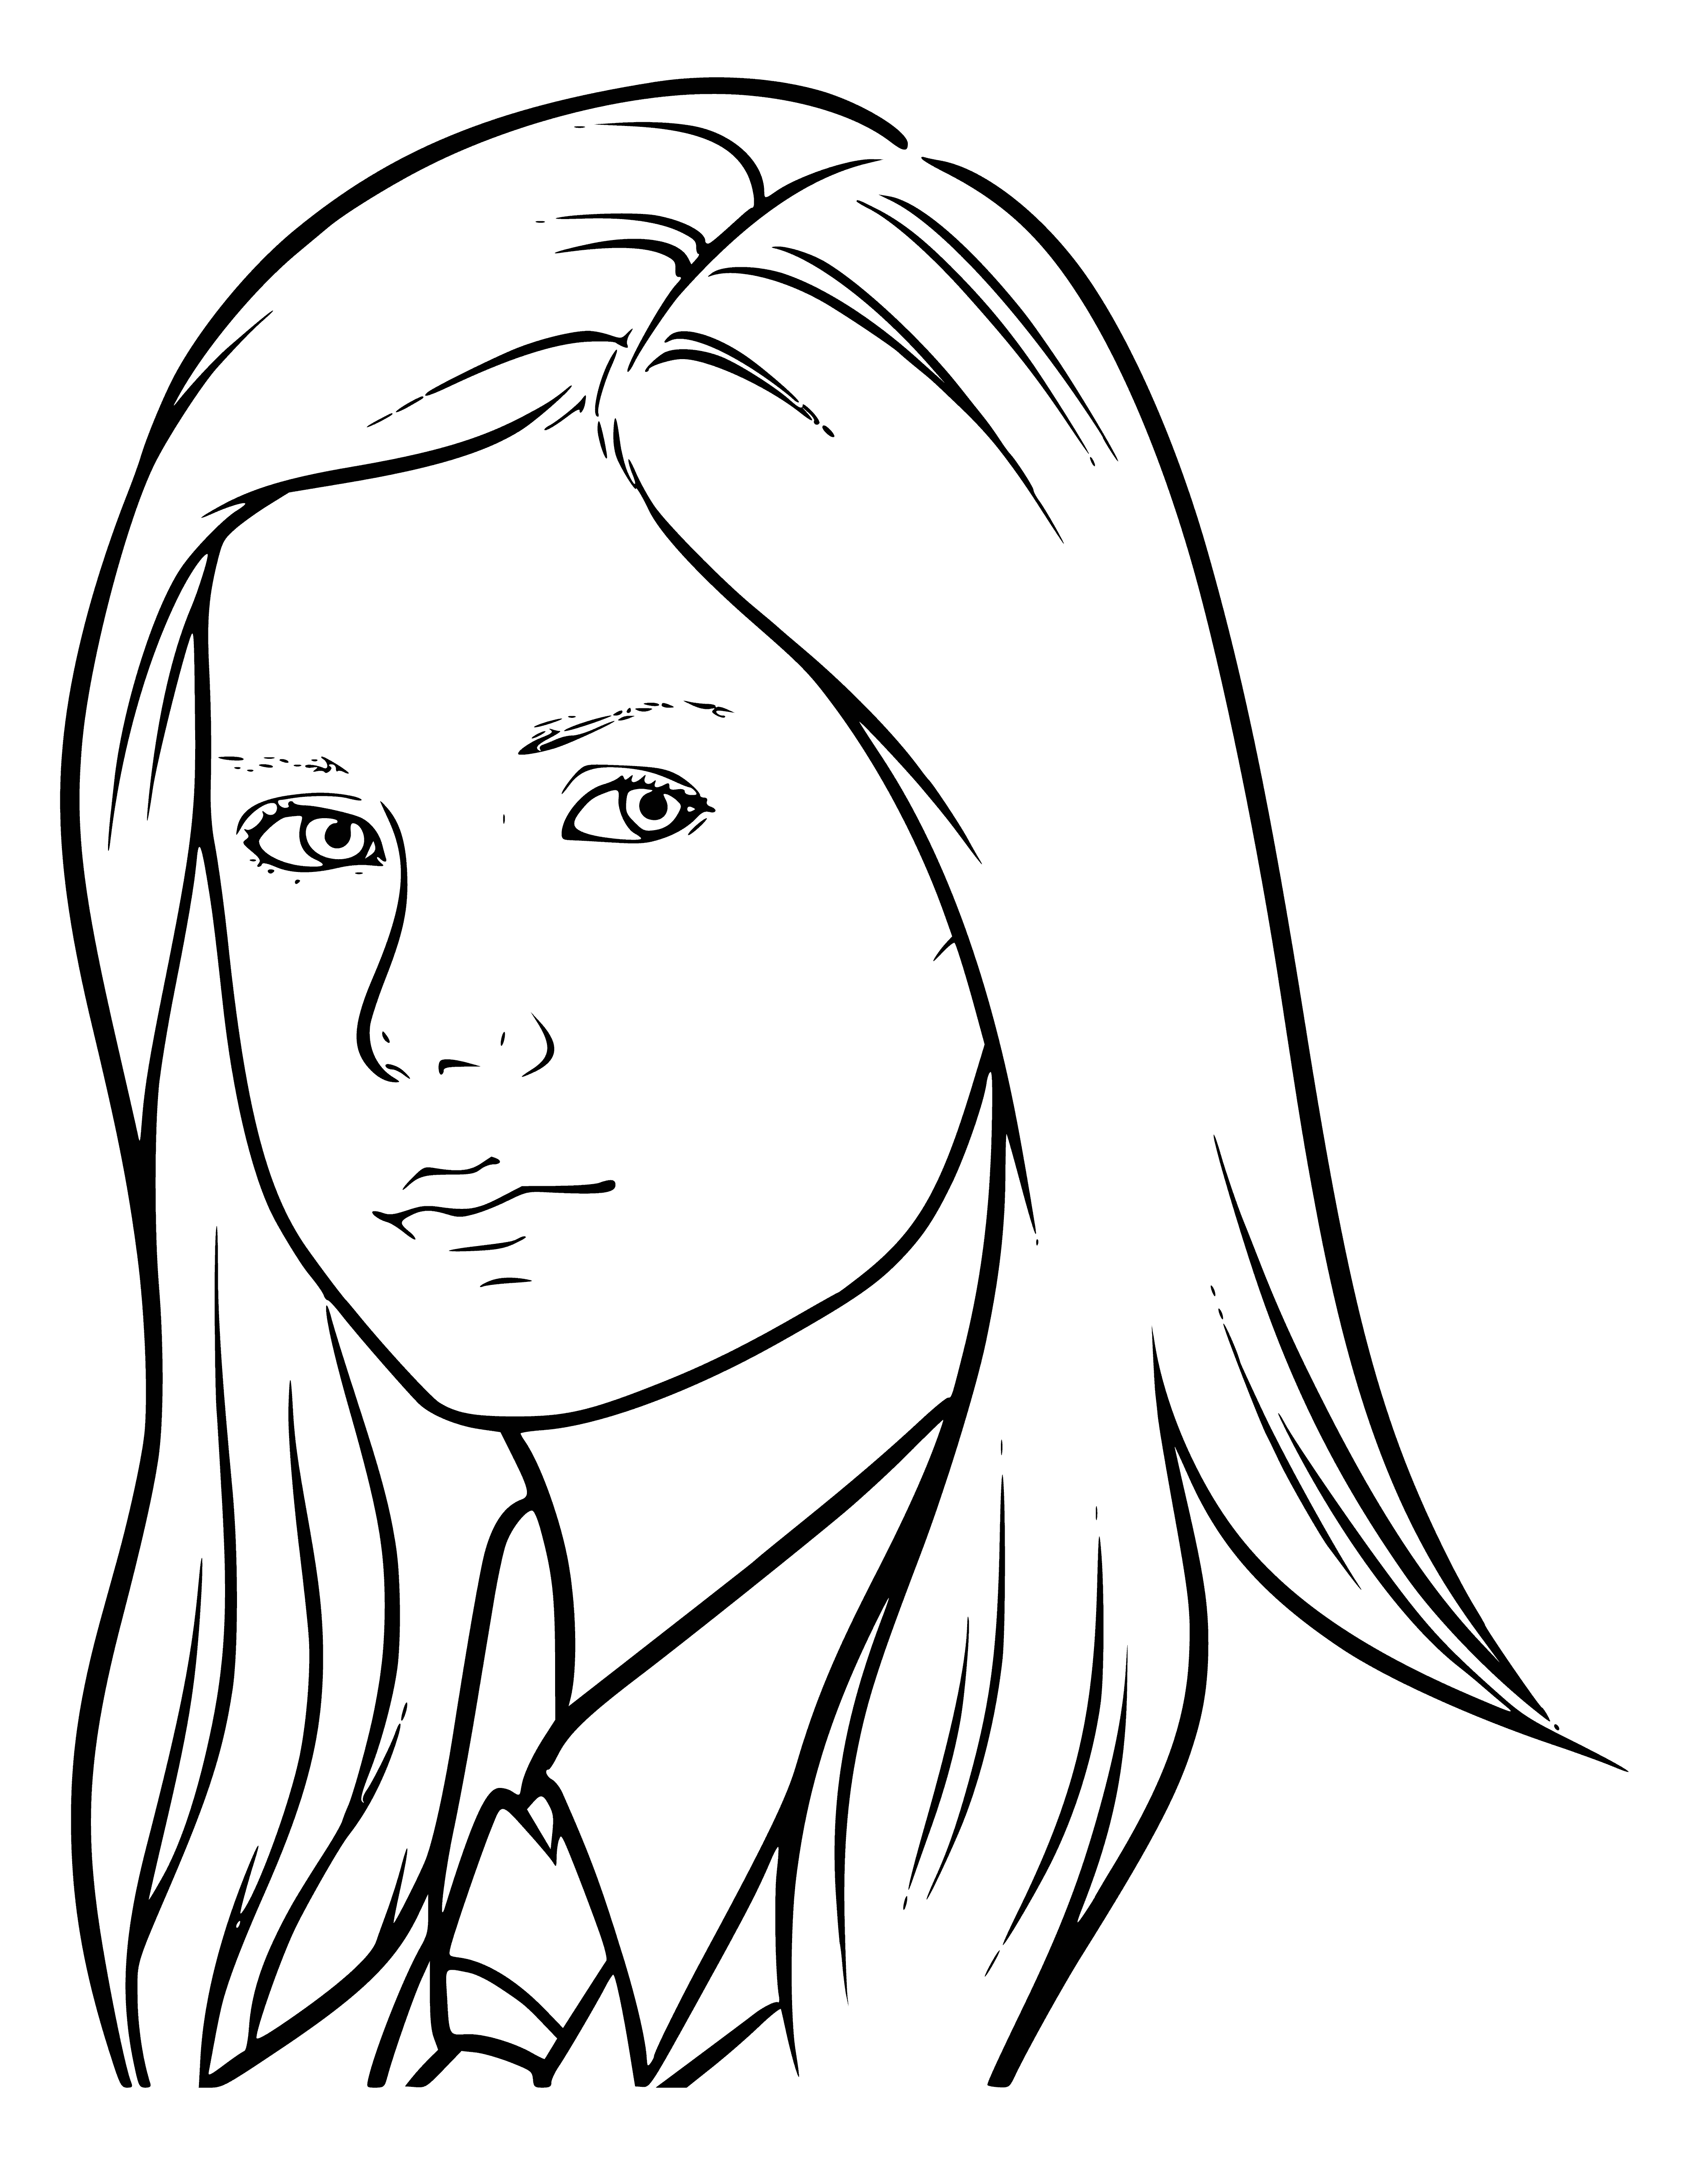 Ginny Weasley coloring page